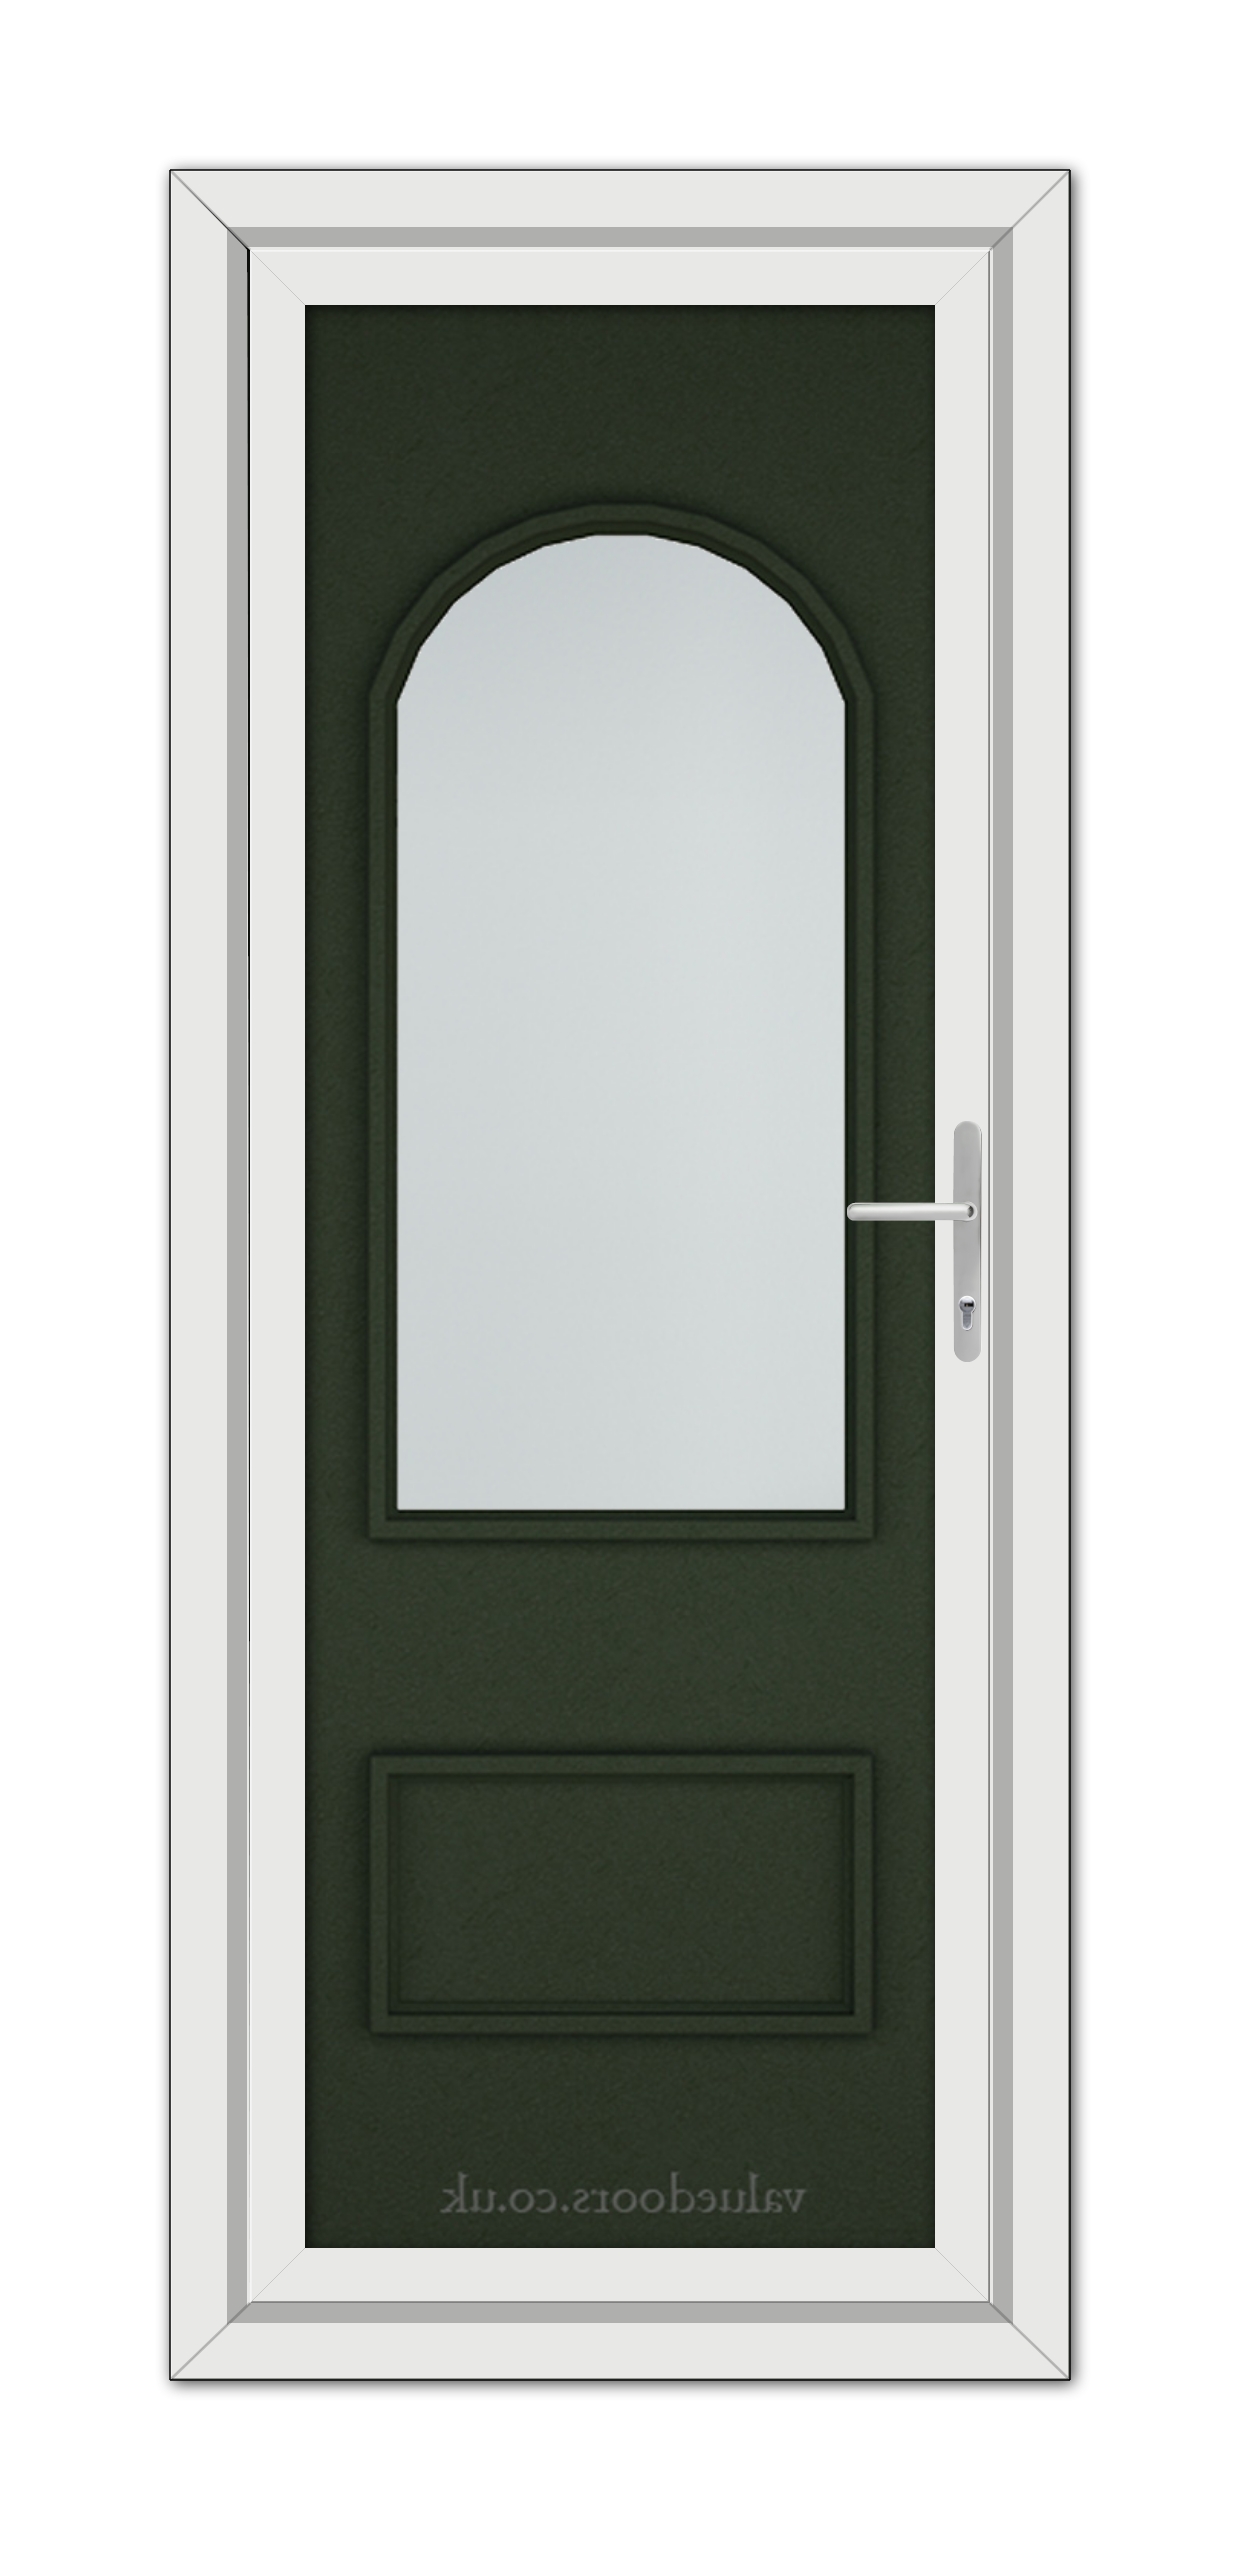 A Green Rockingham uPVC Door with an arched window and a silver handle, framed within a white door frame.